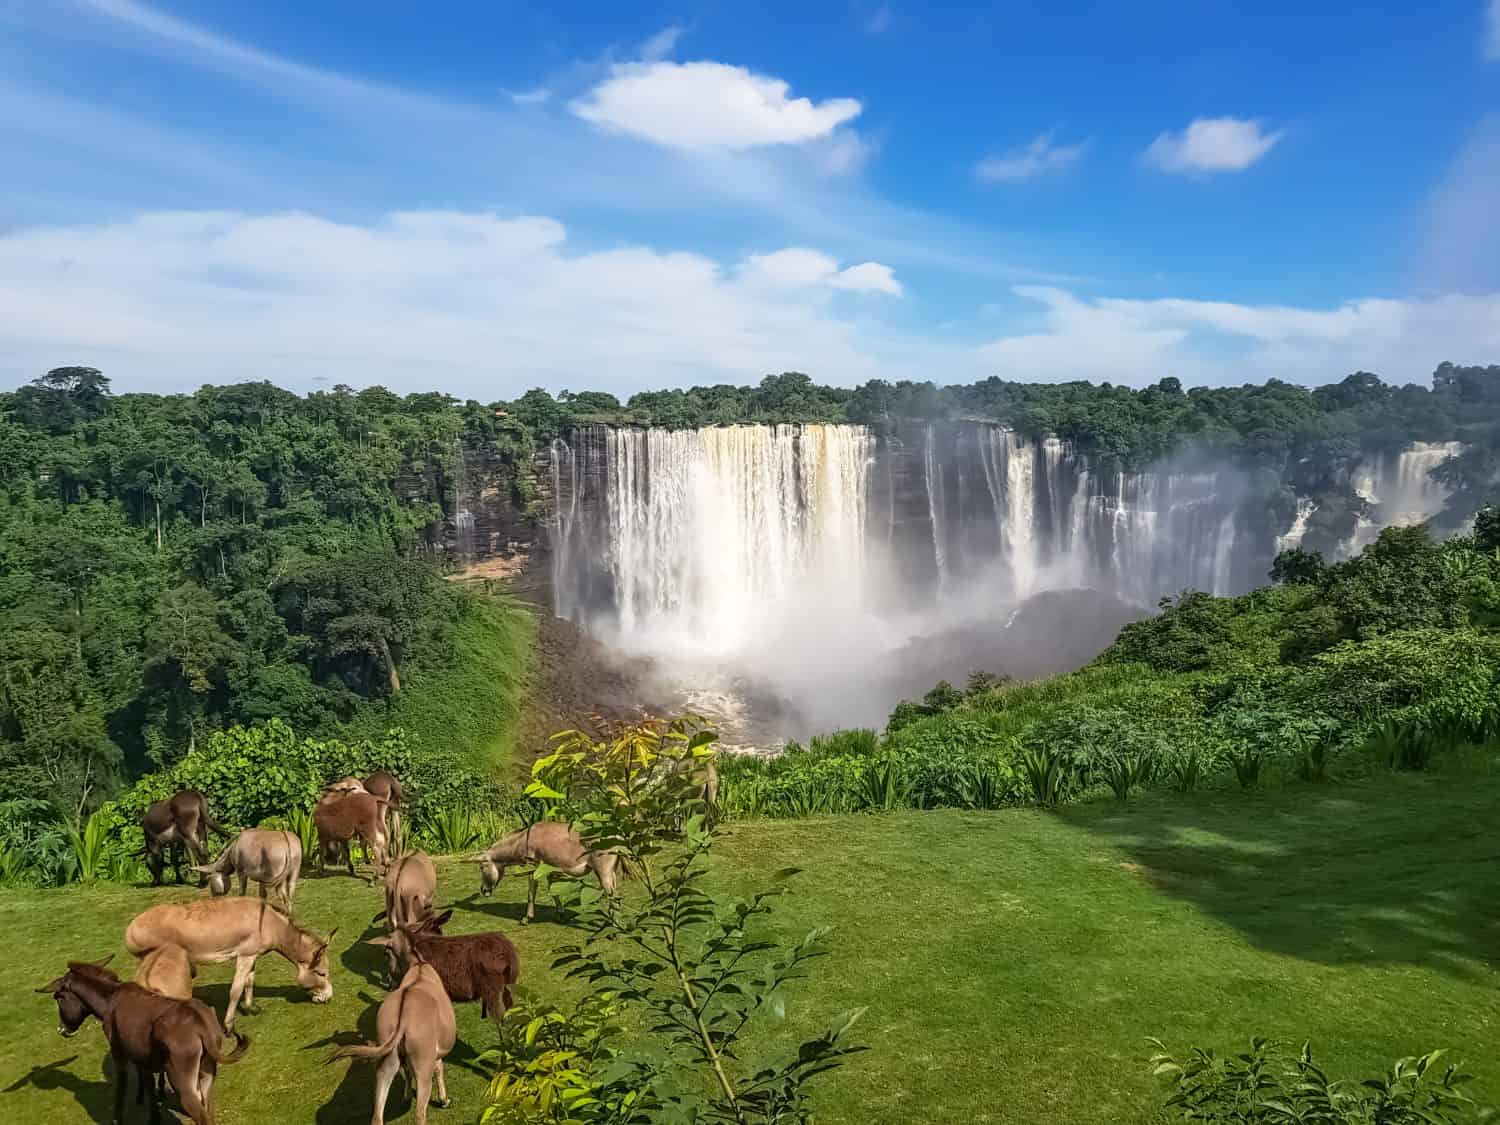 View of the Kalandula waterfalls on Lucala river, Donkeys grazing in a field of herbs, tropical forest and cloudy sky as background, in Angola